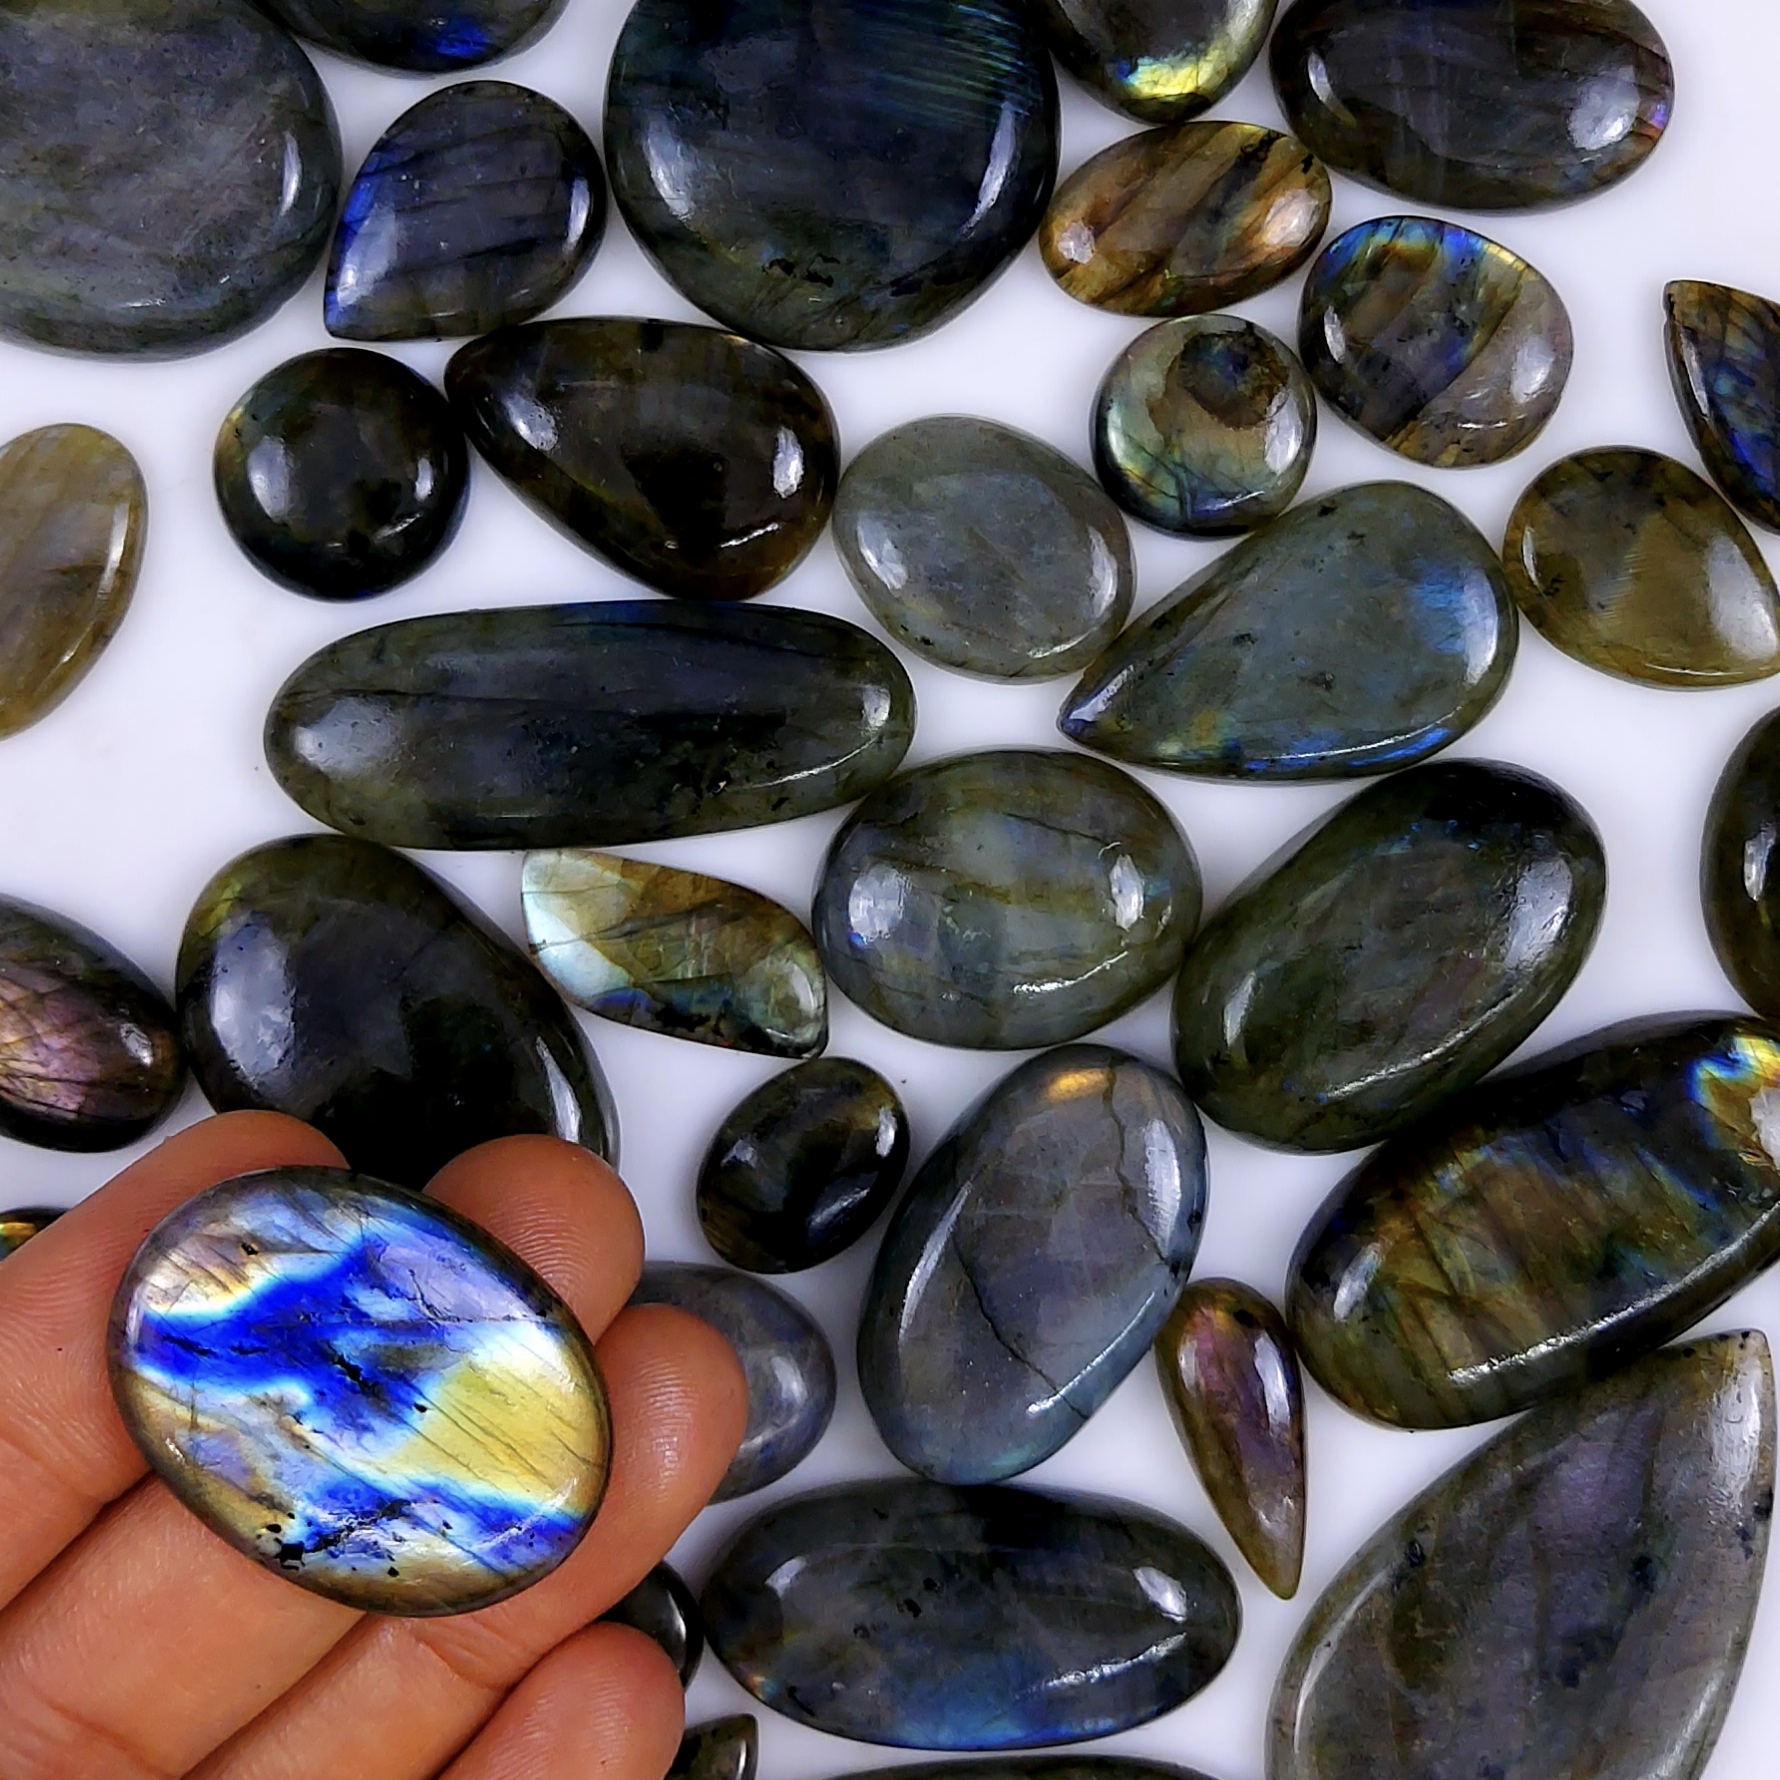 40pc 1587Cts Labradorite Cabochon Multifire Healing Crystal For Jewelry Supplies, Labradorite Necklace Handmade Wire Wrapped Gemstone Pendant 50x20 22x15mm#6316